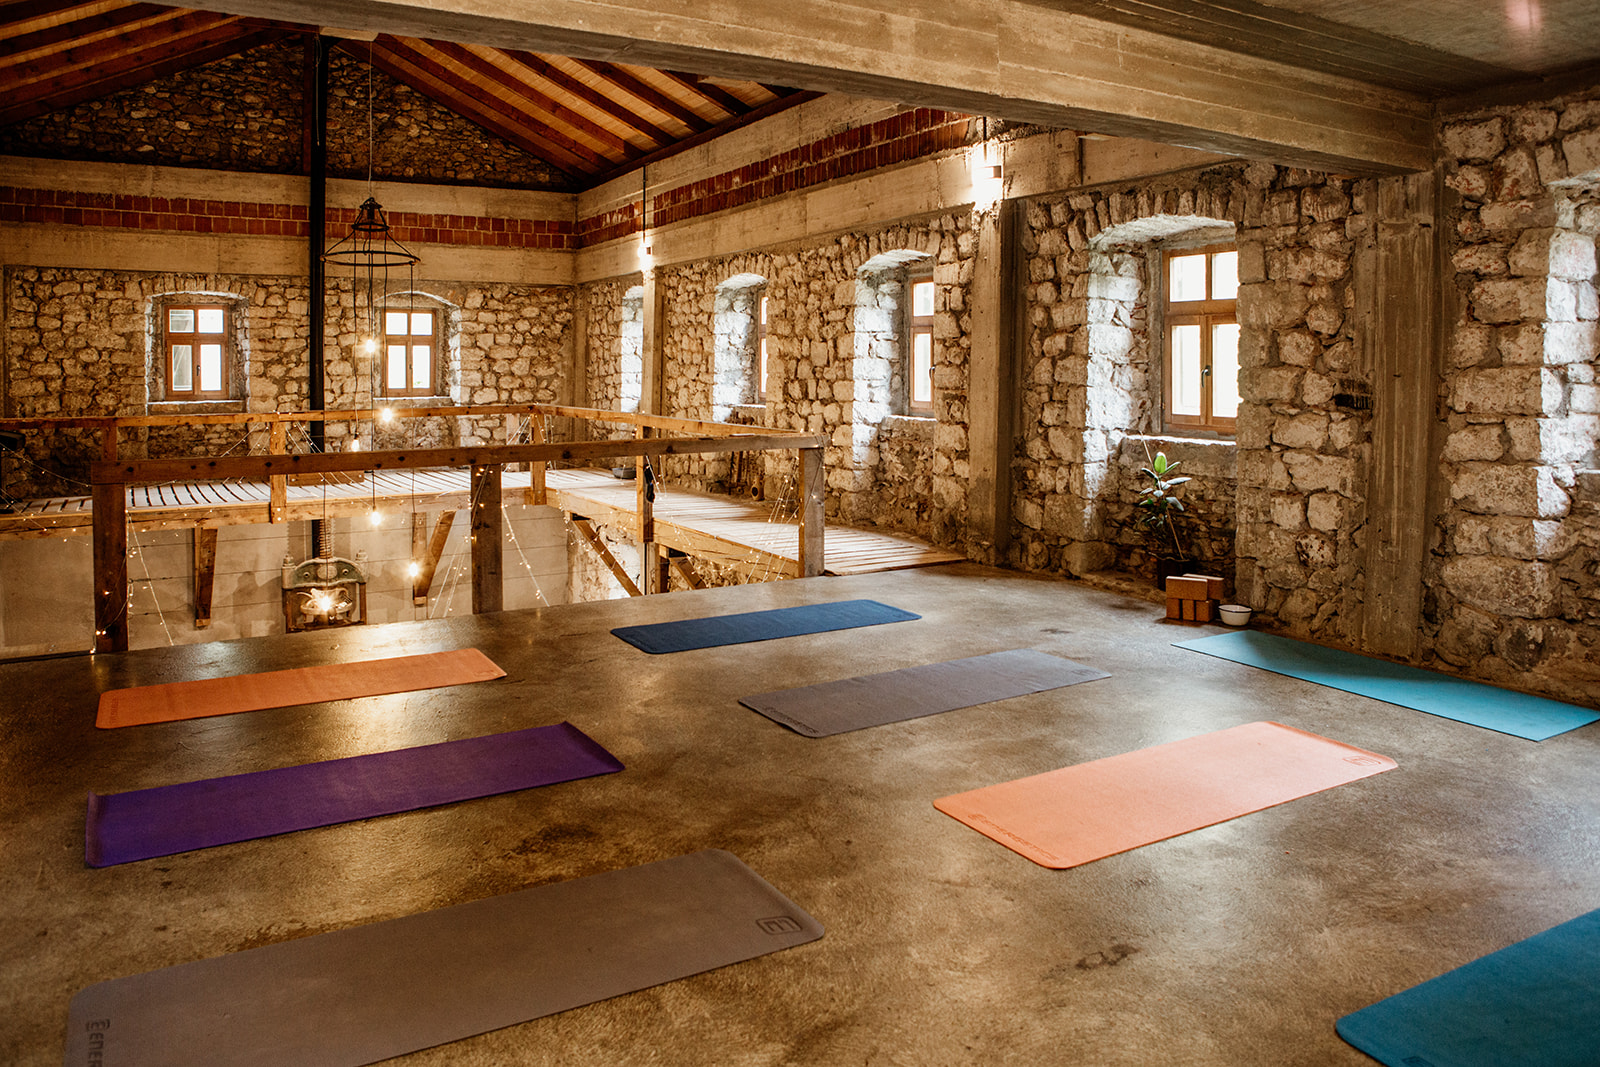 yoga space with mats down - hiking yoga holiday montenegro